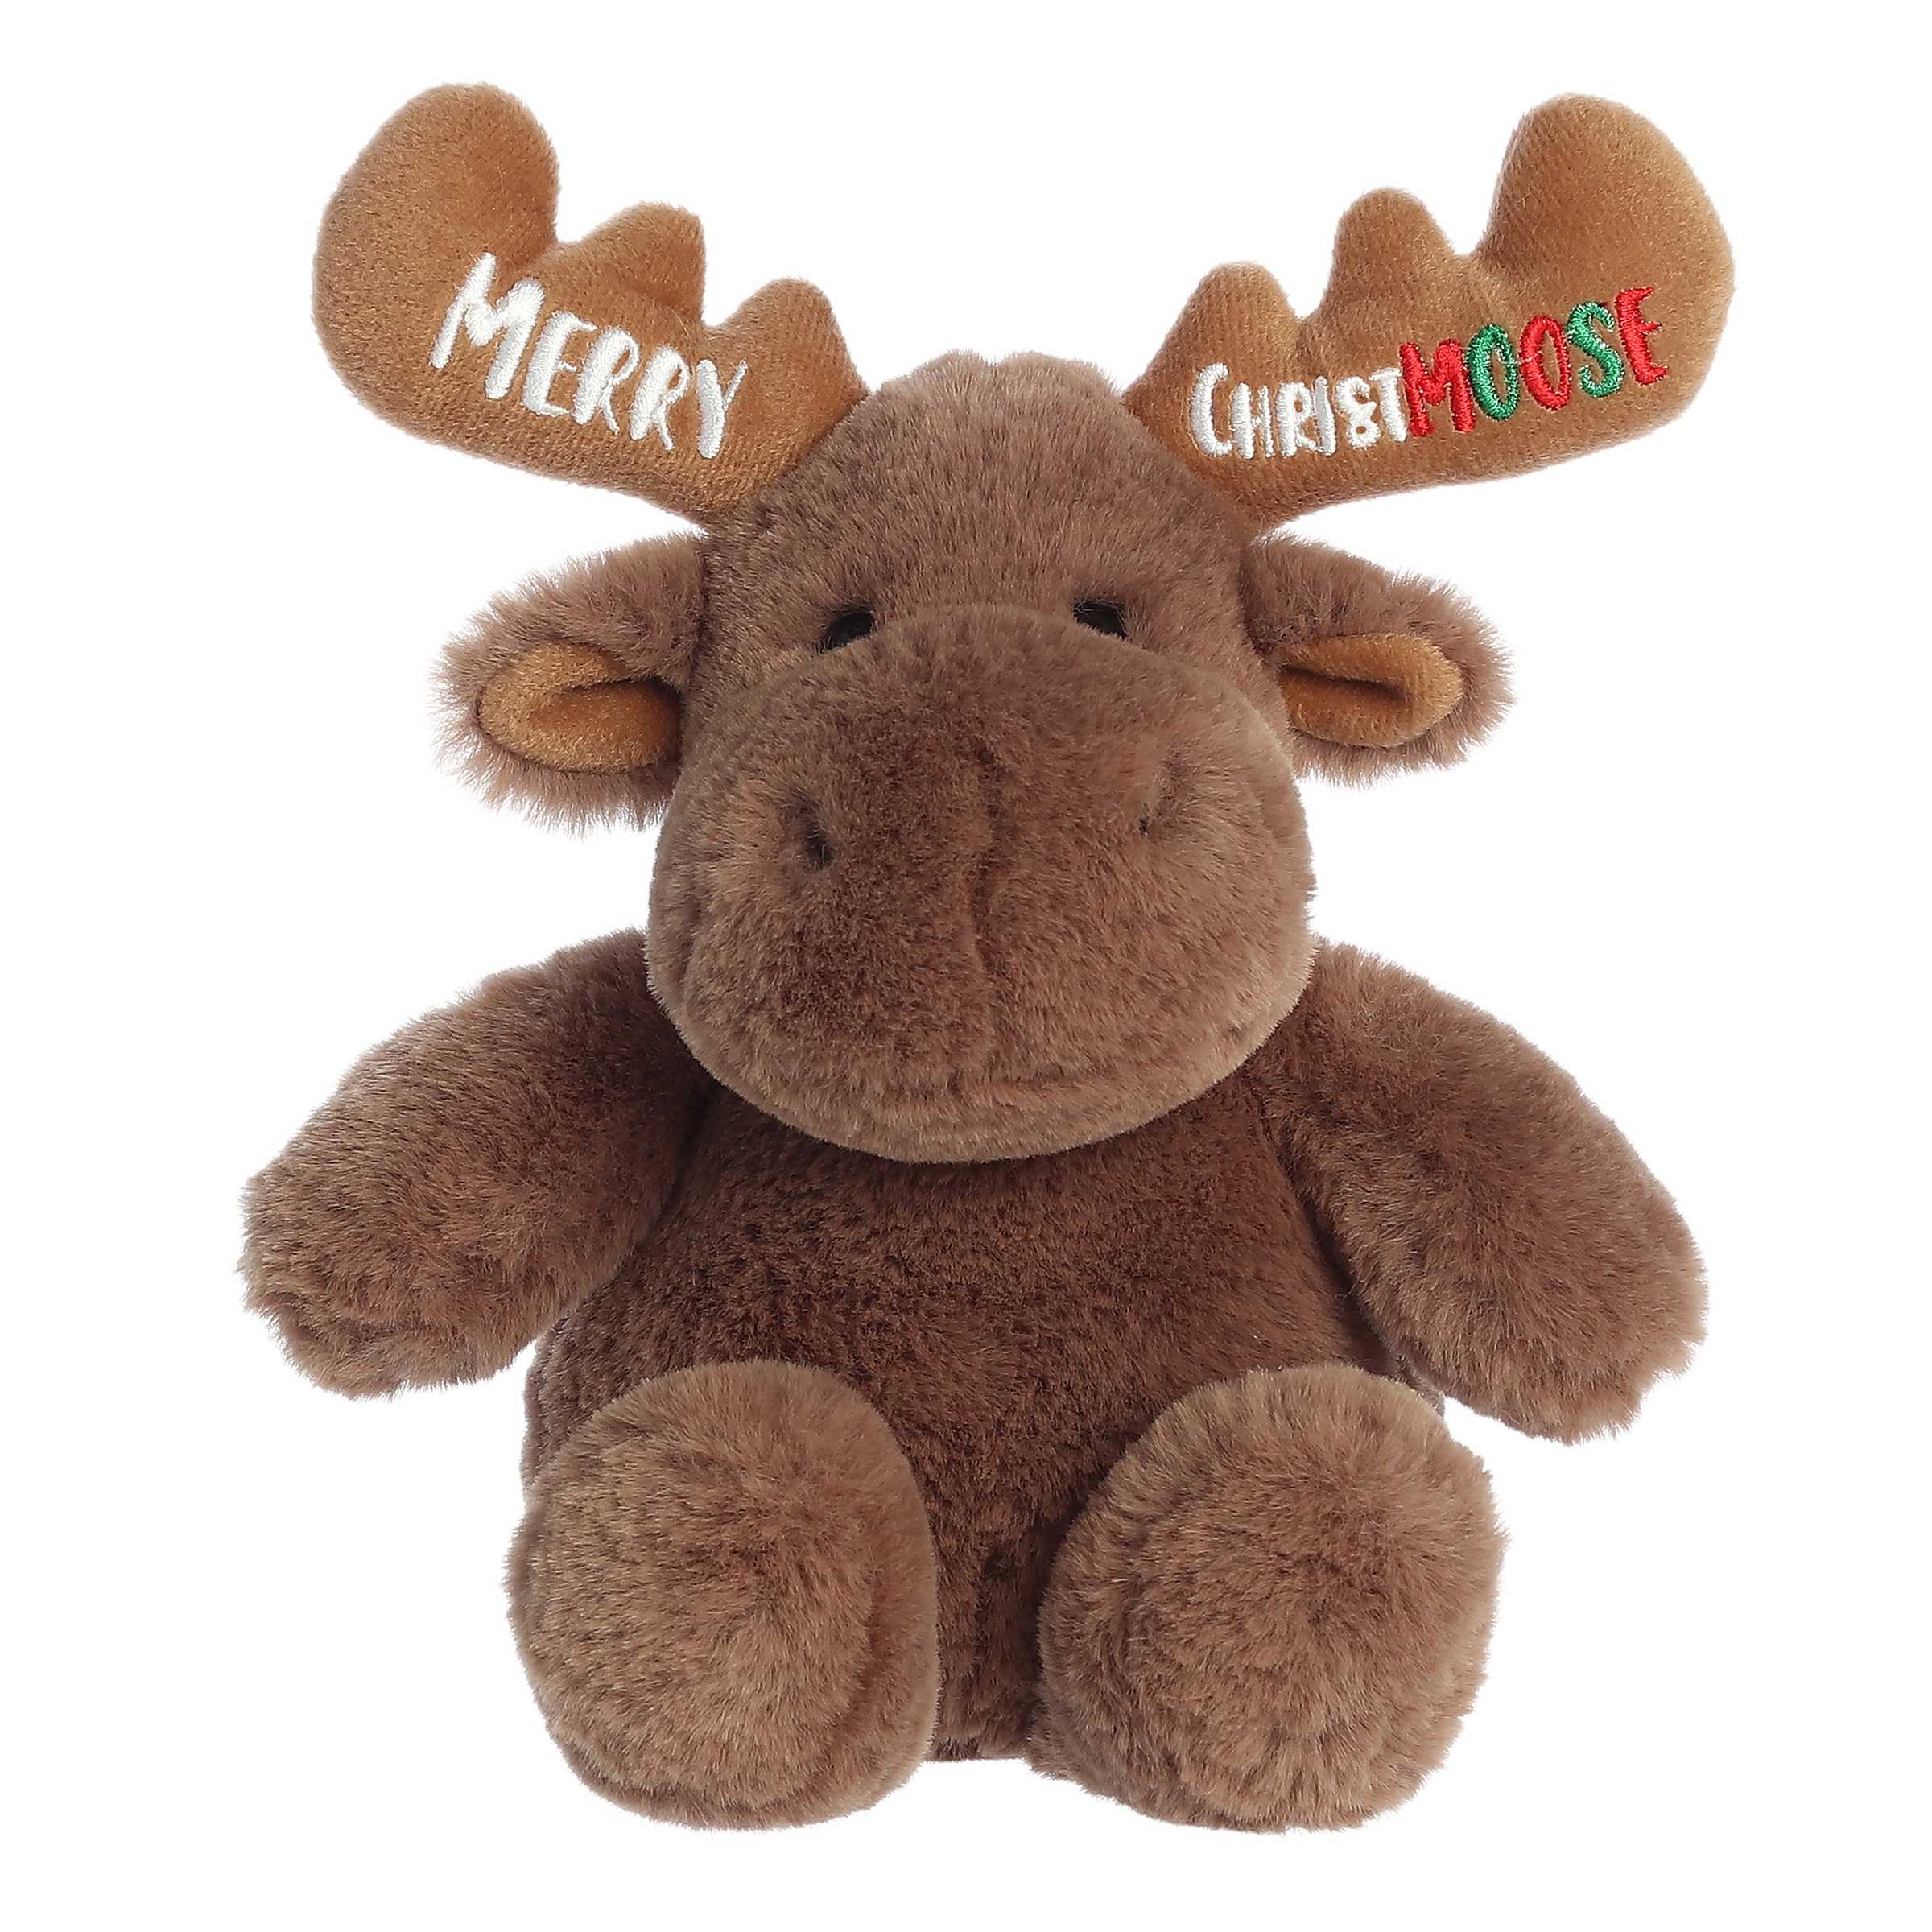 Adorable brown moose stuffed animal with giant antlers embroidered with the phrase "Merry Christ-MOOSE"